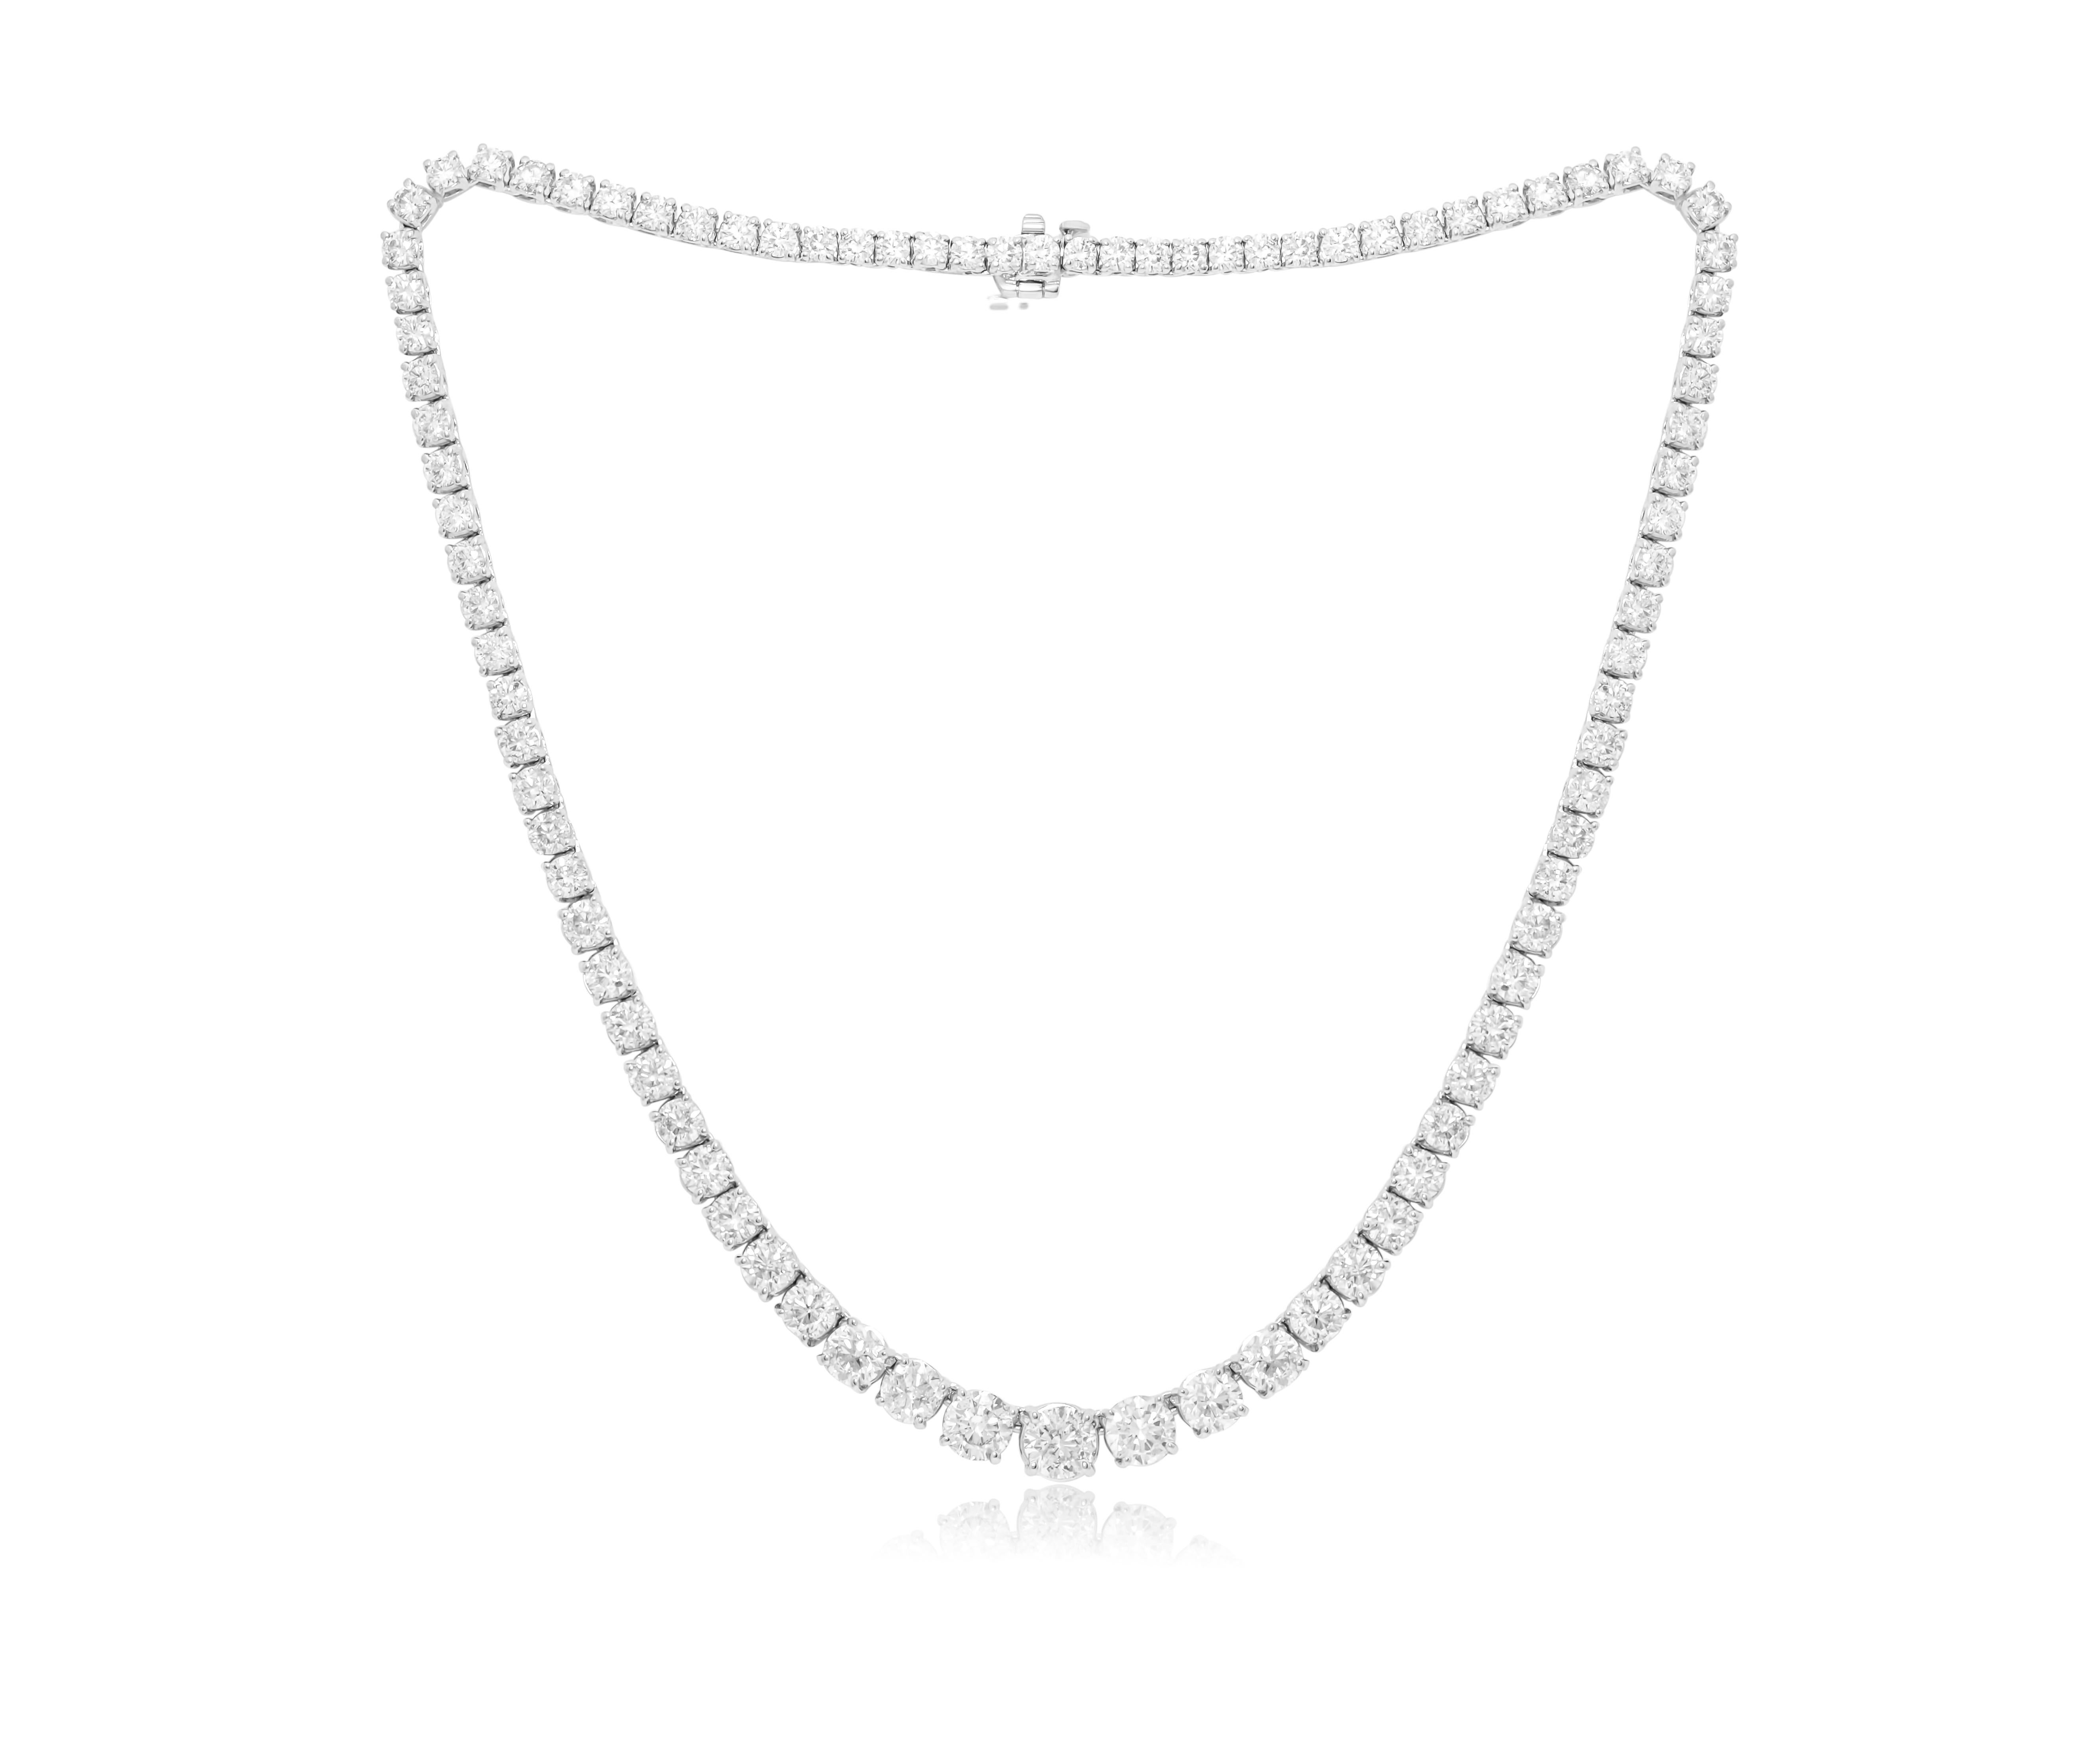 14kt white gold graduated tennis necklace featuring 20.00 cts of round brilliant diamonds set in a 4 prong setting.
Diana M. is a leading supplier of top-quality fine jewelry for over 35 years.
Diana M is one-stop shop for all your jewelry shopping,